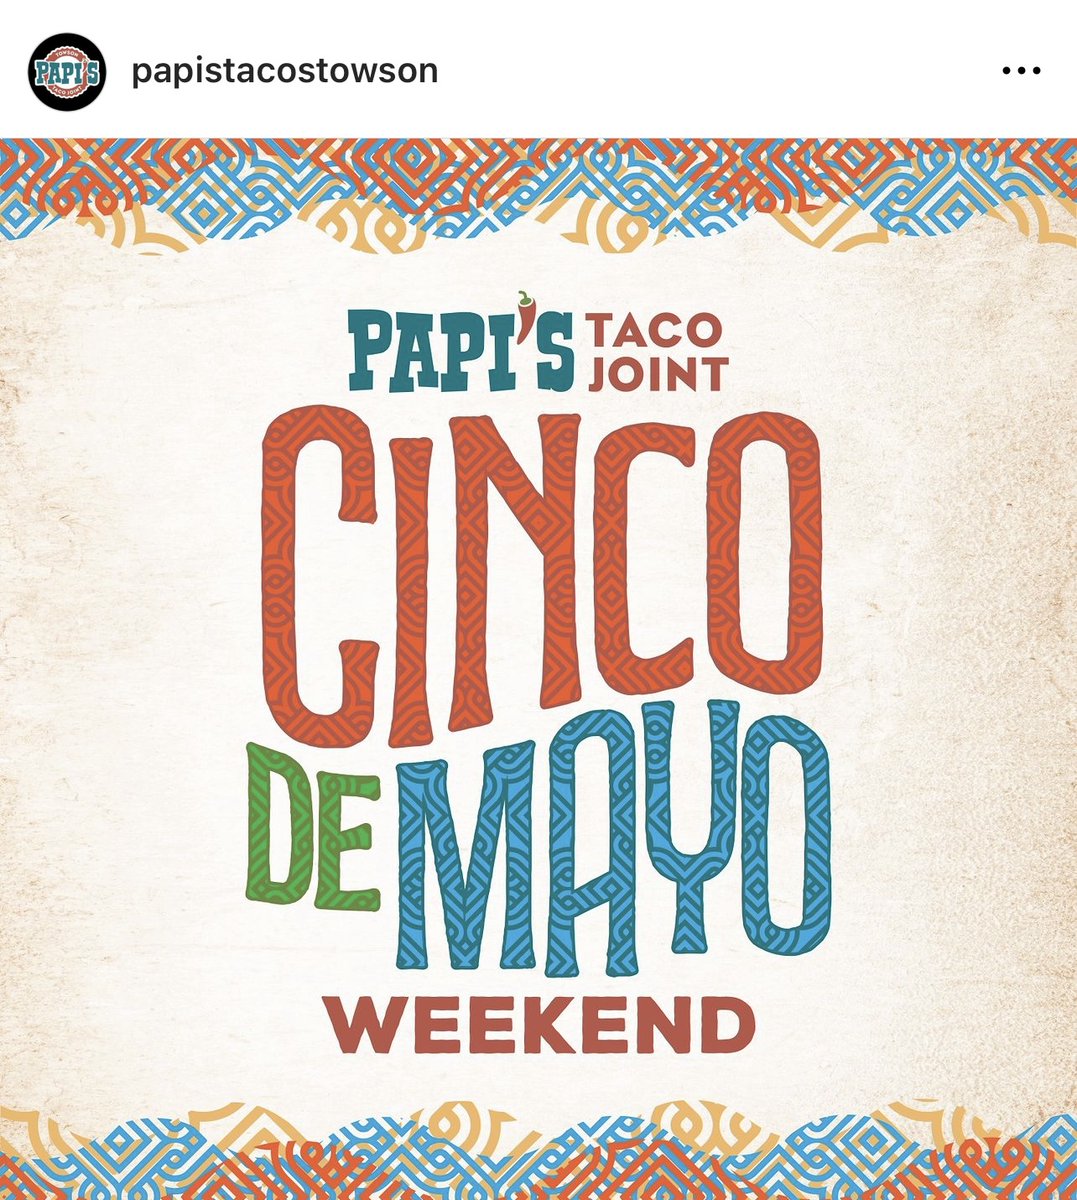 Happy #CincoDeMayo party people🍹🌮 🍹 Pop into Papi's Taco Towson for some fun #specials☀️

#DulaneyPlaza #Community #Shoplocal #Supportlocal #Cinco #Celebrate #Happyhour #FriendsandFamily #SundayFunday #Cheers